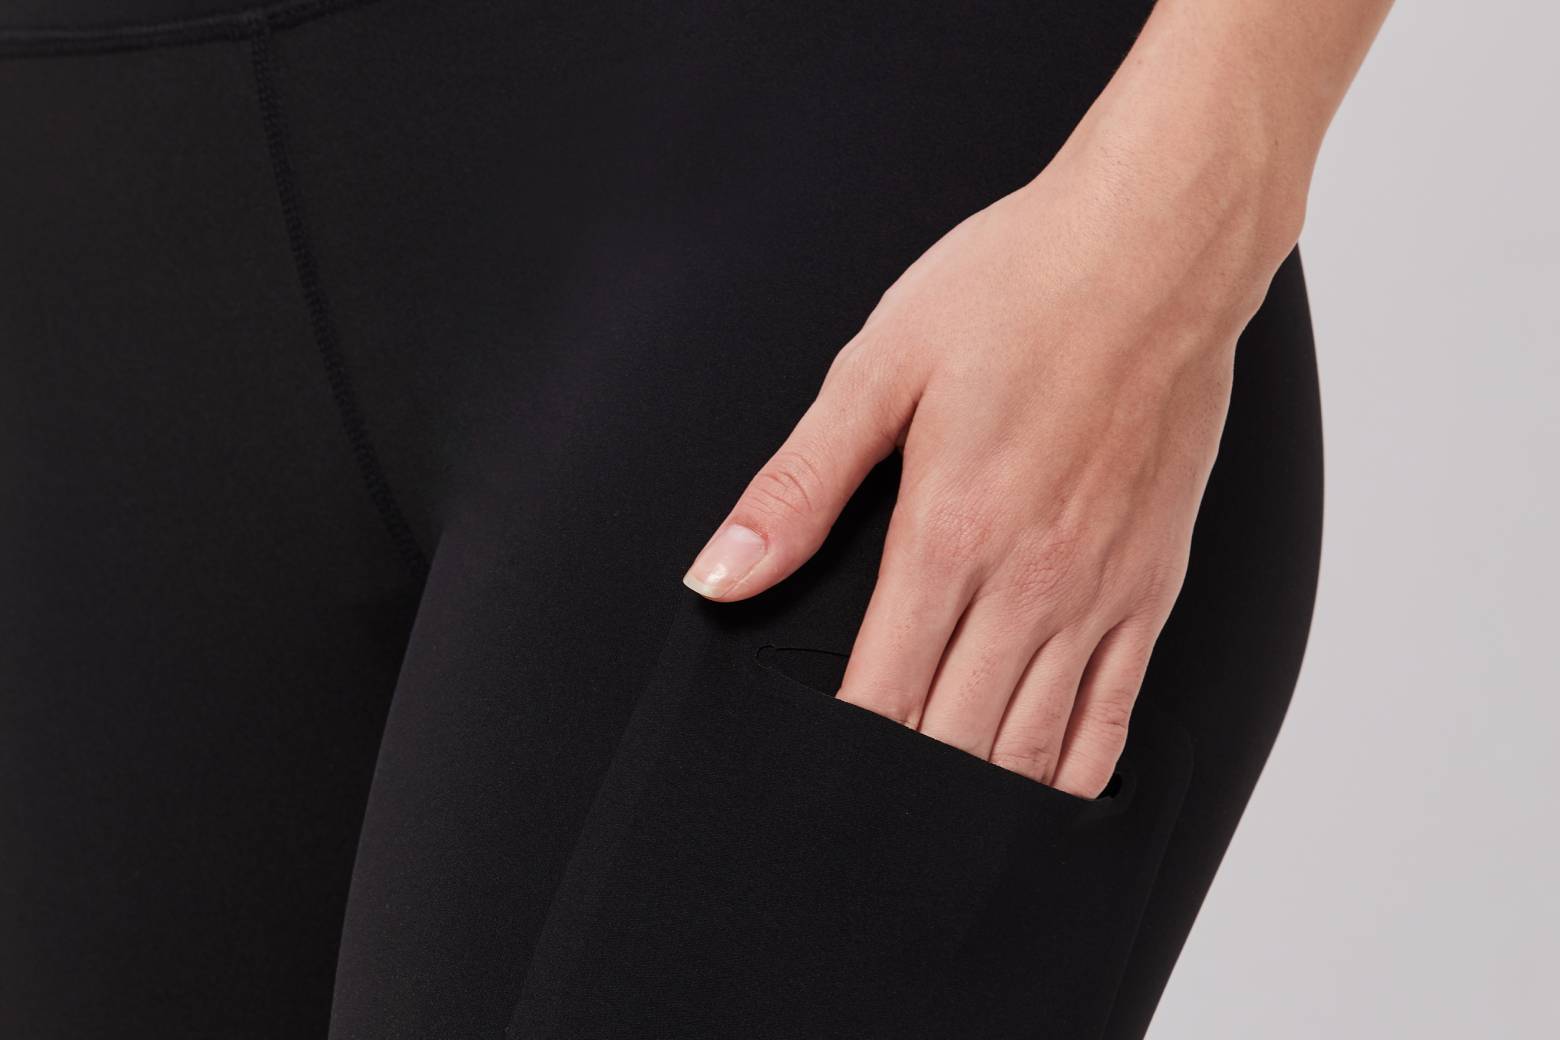 The Essential Pocket Tights